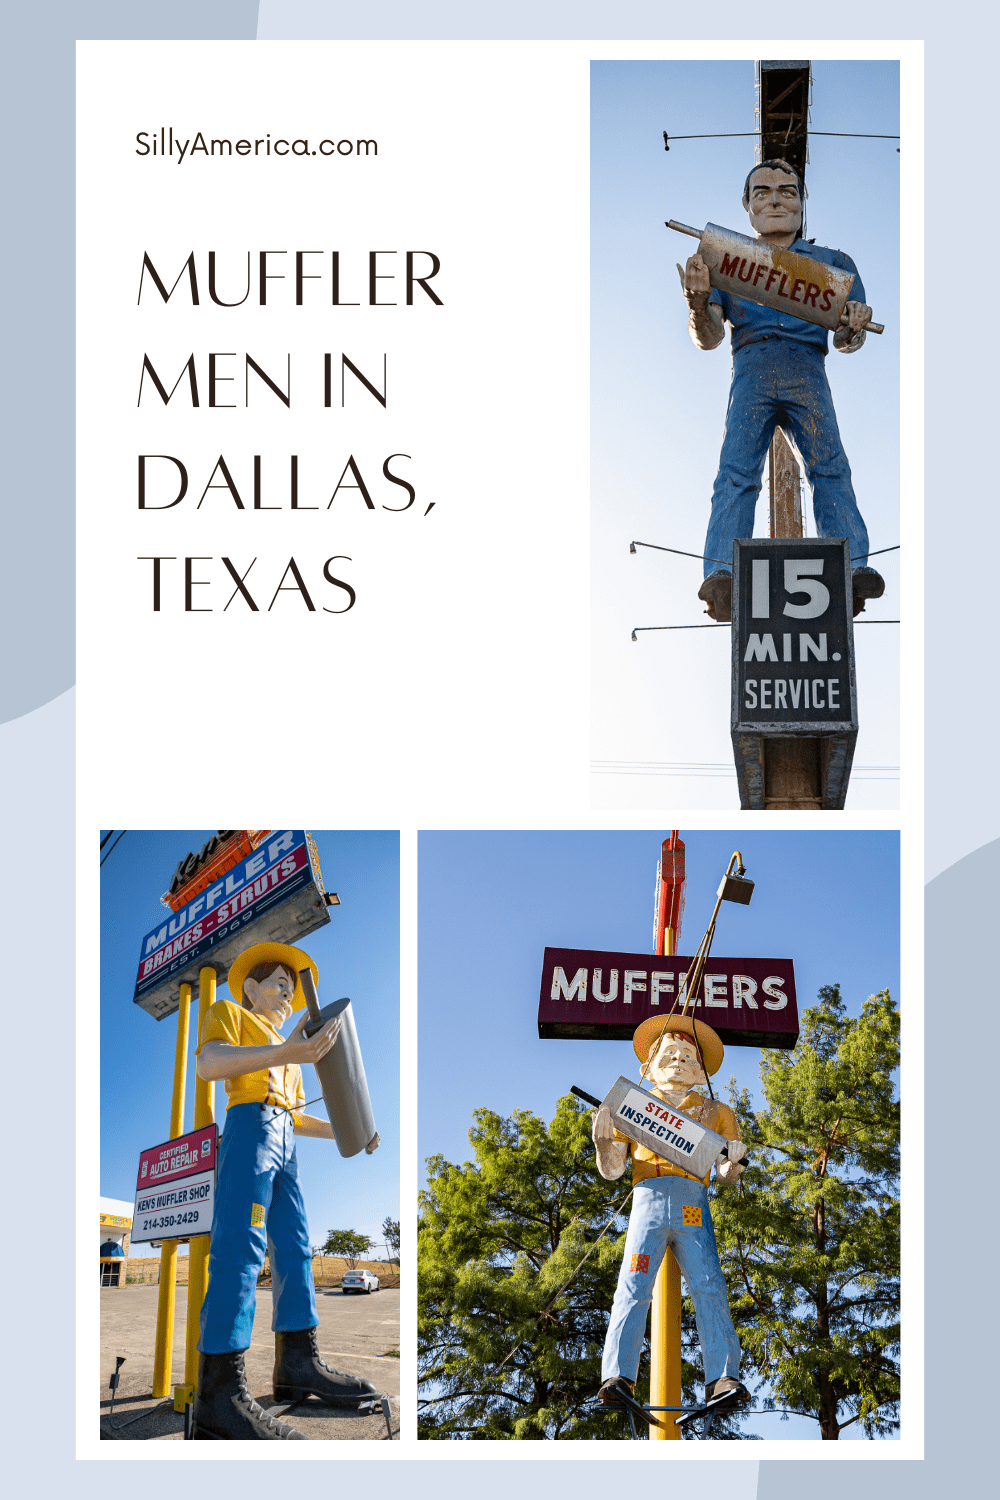 There are three Muffler Men in Dallas, Texas and each one of them actually carries a muffler. There's a standard muffler man and two happy halfwits. This roadside attraction was popular in the 1960s and can still be found on a US road trip or Texas road trip today. #Texas #DallasTexas #RoadTrip #TexasRoadTrip #RoadsideAttraction #RoadsideAttractions